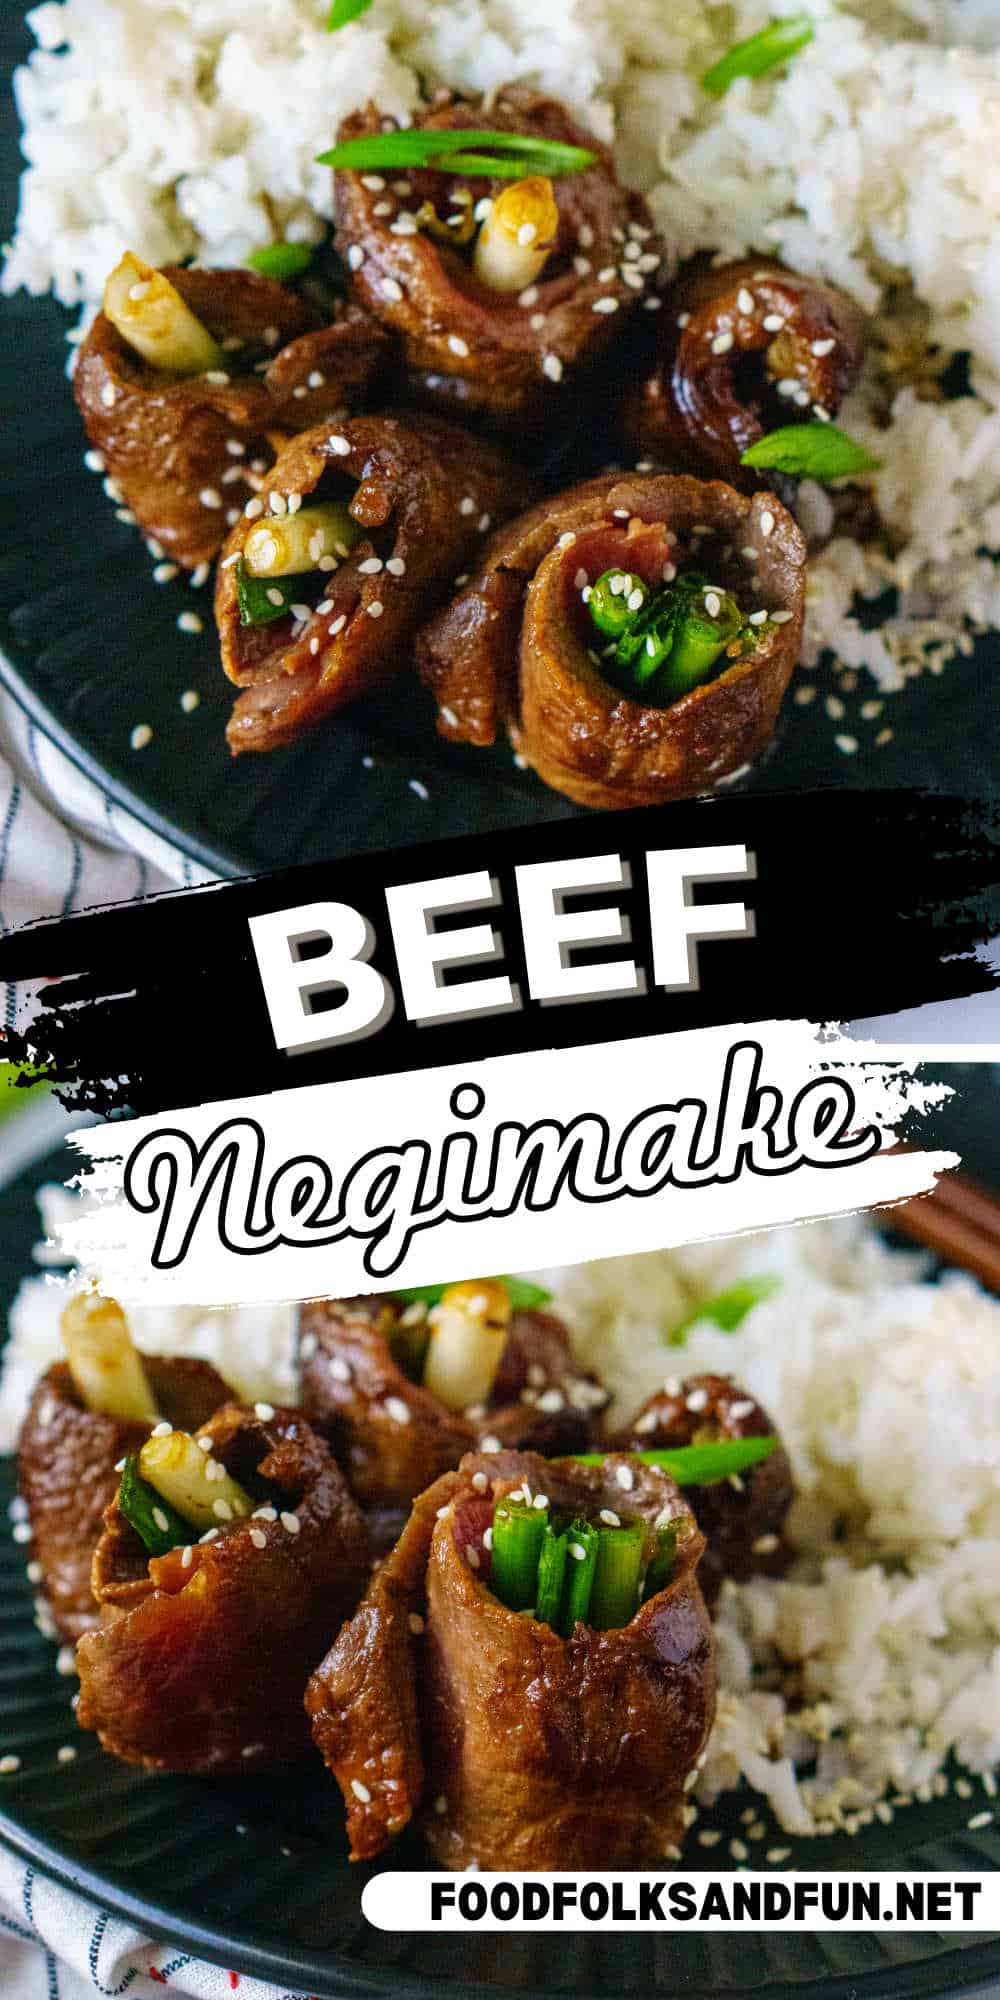 Unleash a burst of Japanese flavor! Juicy beef & fresh scallions spiral in these easy-to-make Beef Negimaki rolls. Appetizer or main course, they're always a hit. via @foodfolksandfun